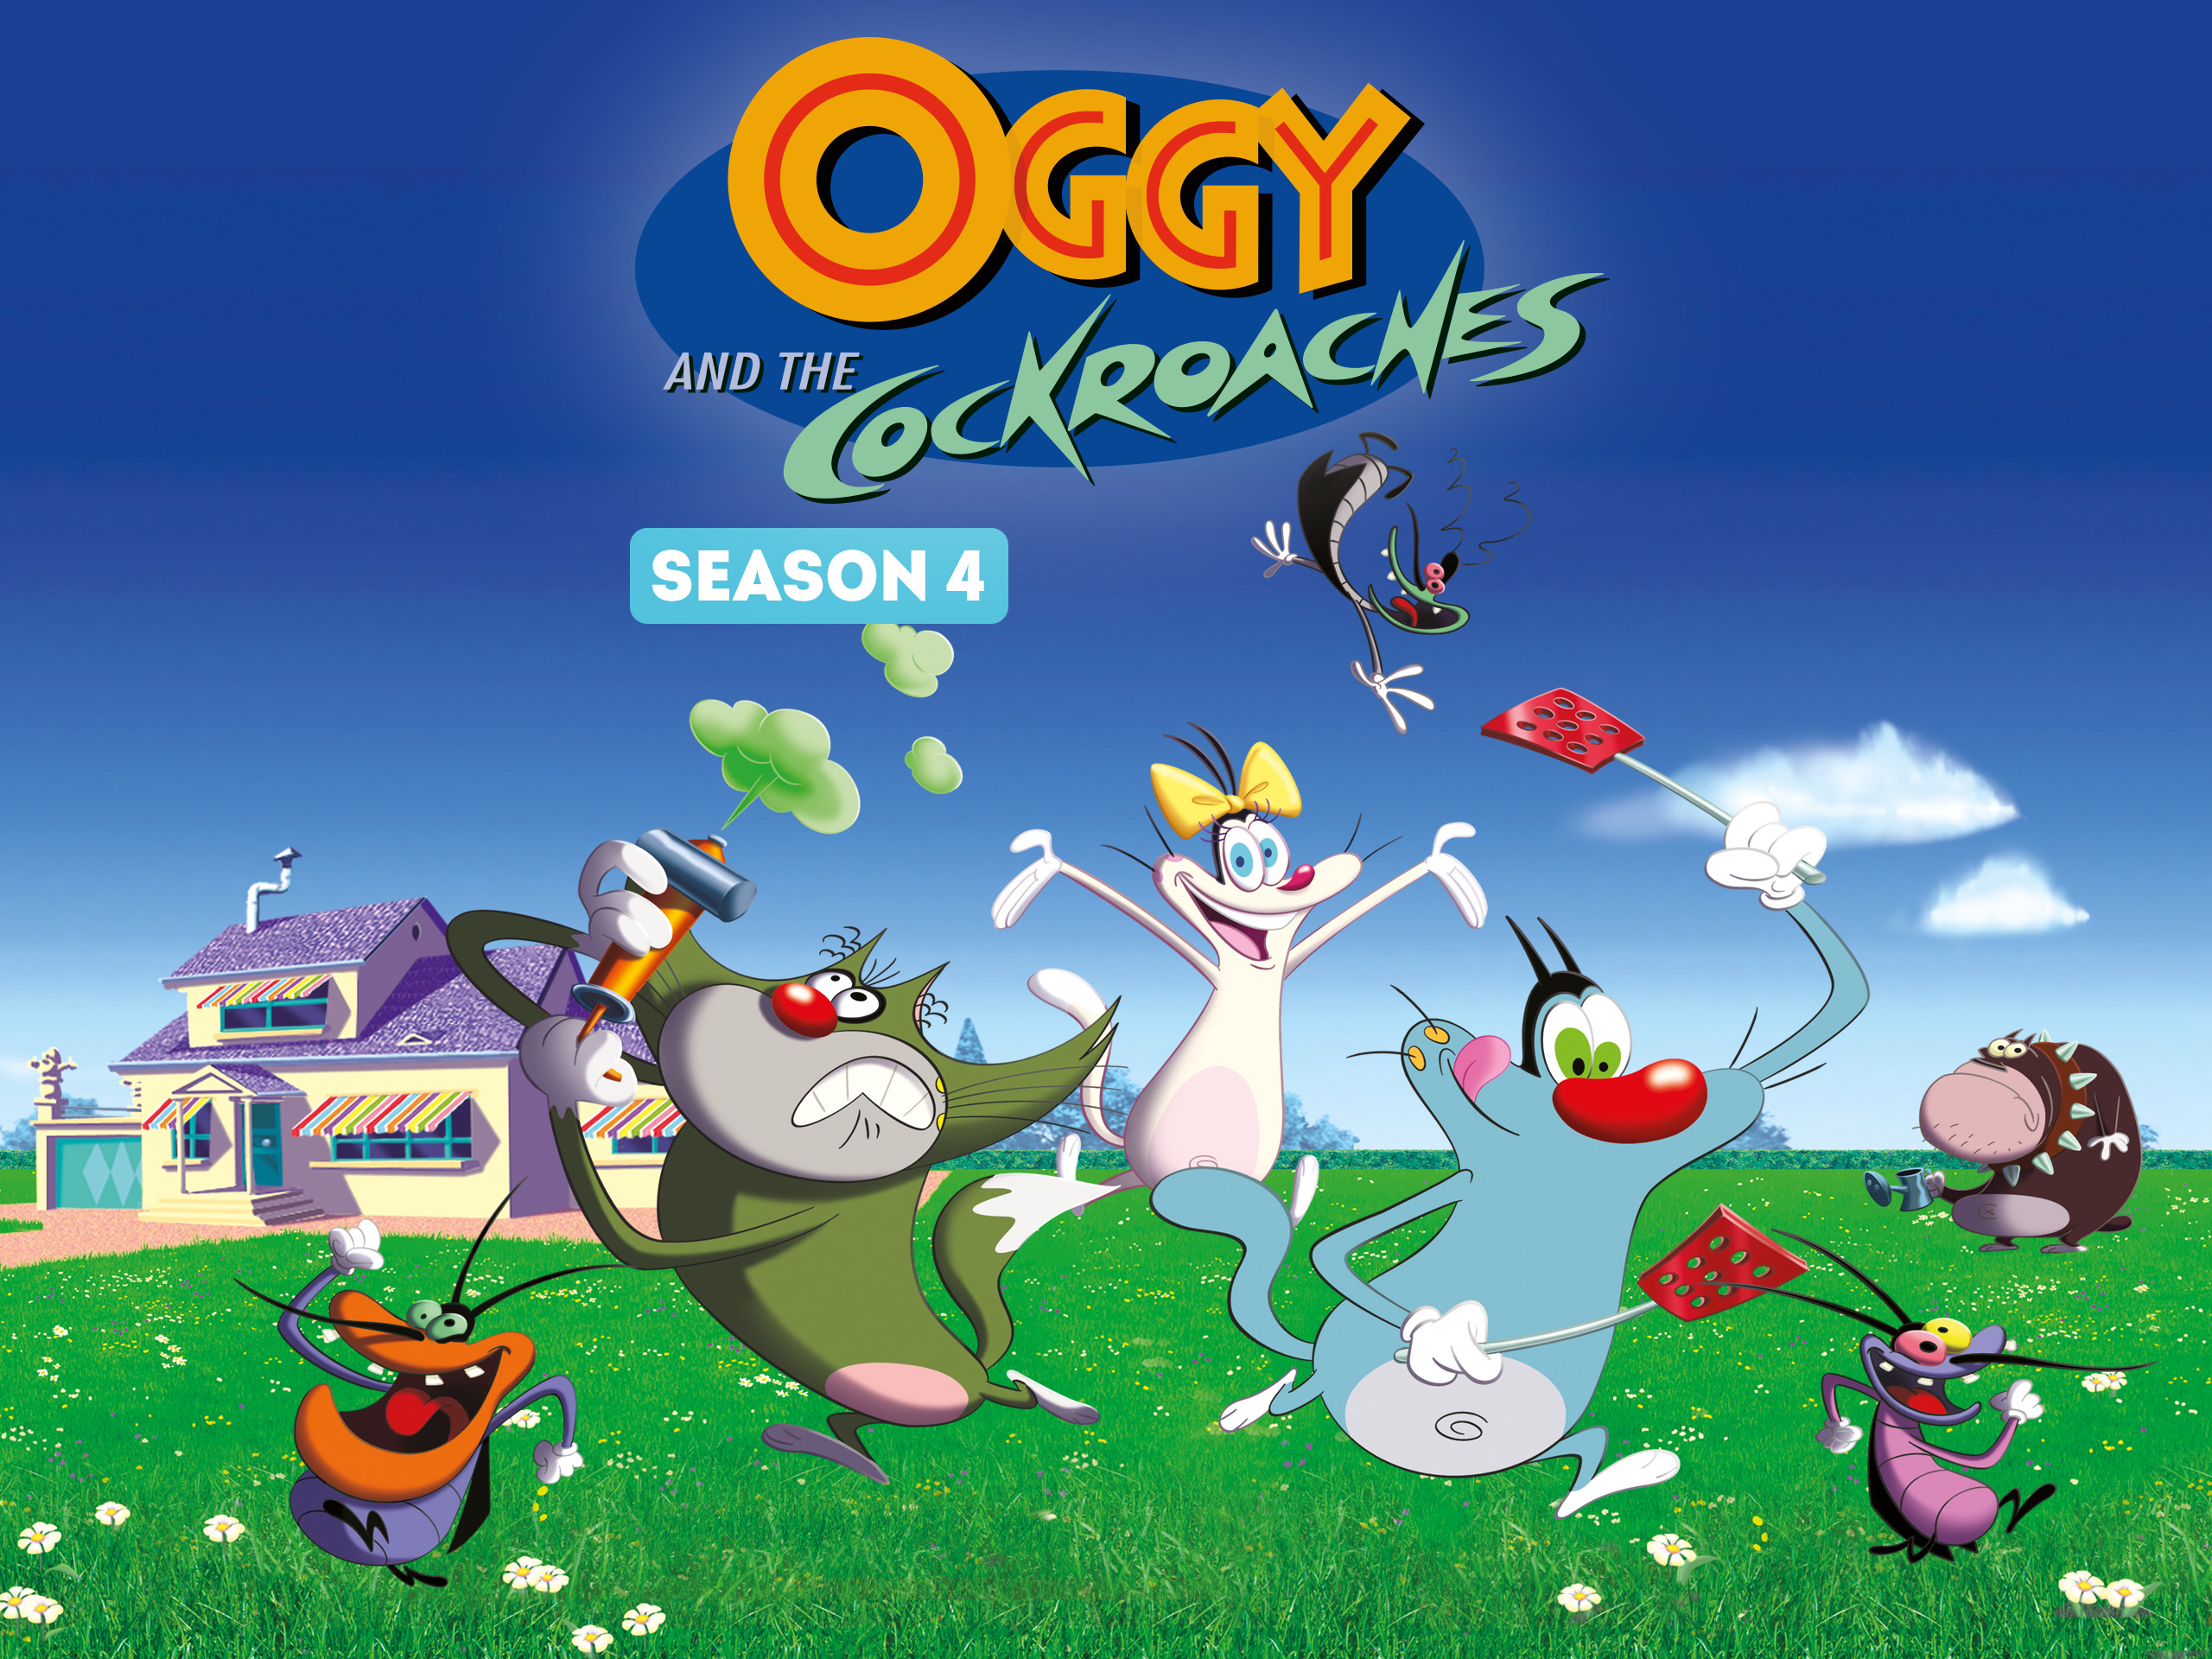 Season 4 (Oggy and the Cockroaches) | Oggy and the Cockroaches Wiki | Fandom